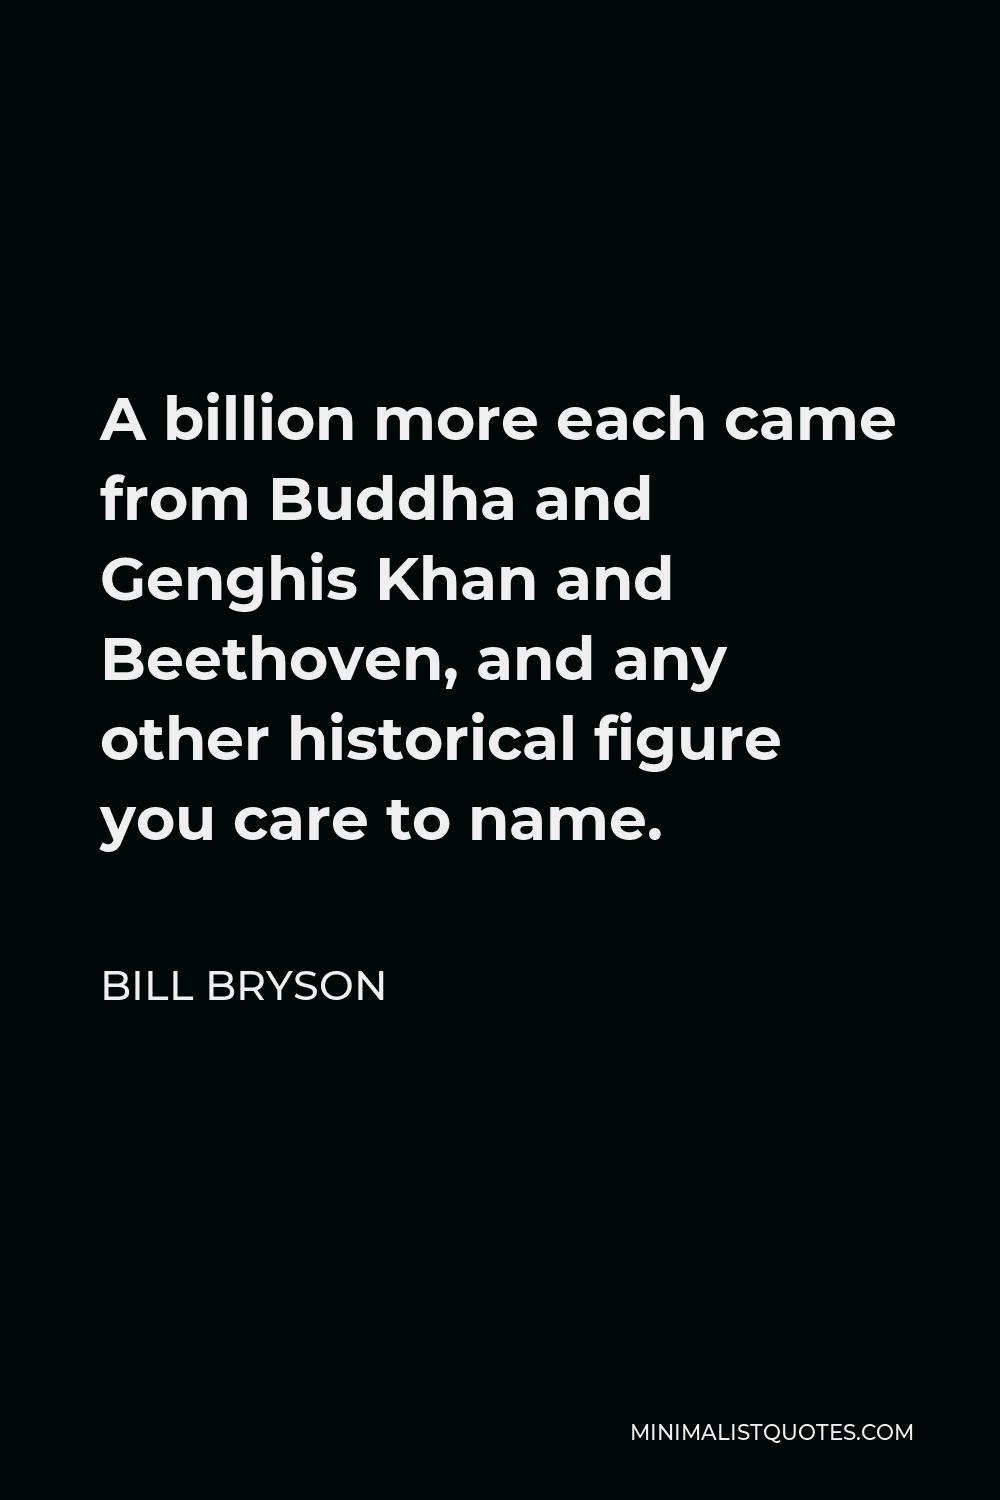 Bill Bryson Quote - A billion more each came from Buddha and Genghis Khan and Beethoven, and any other historical figure you care to name.